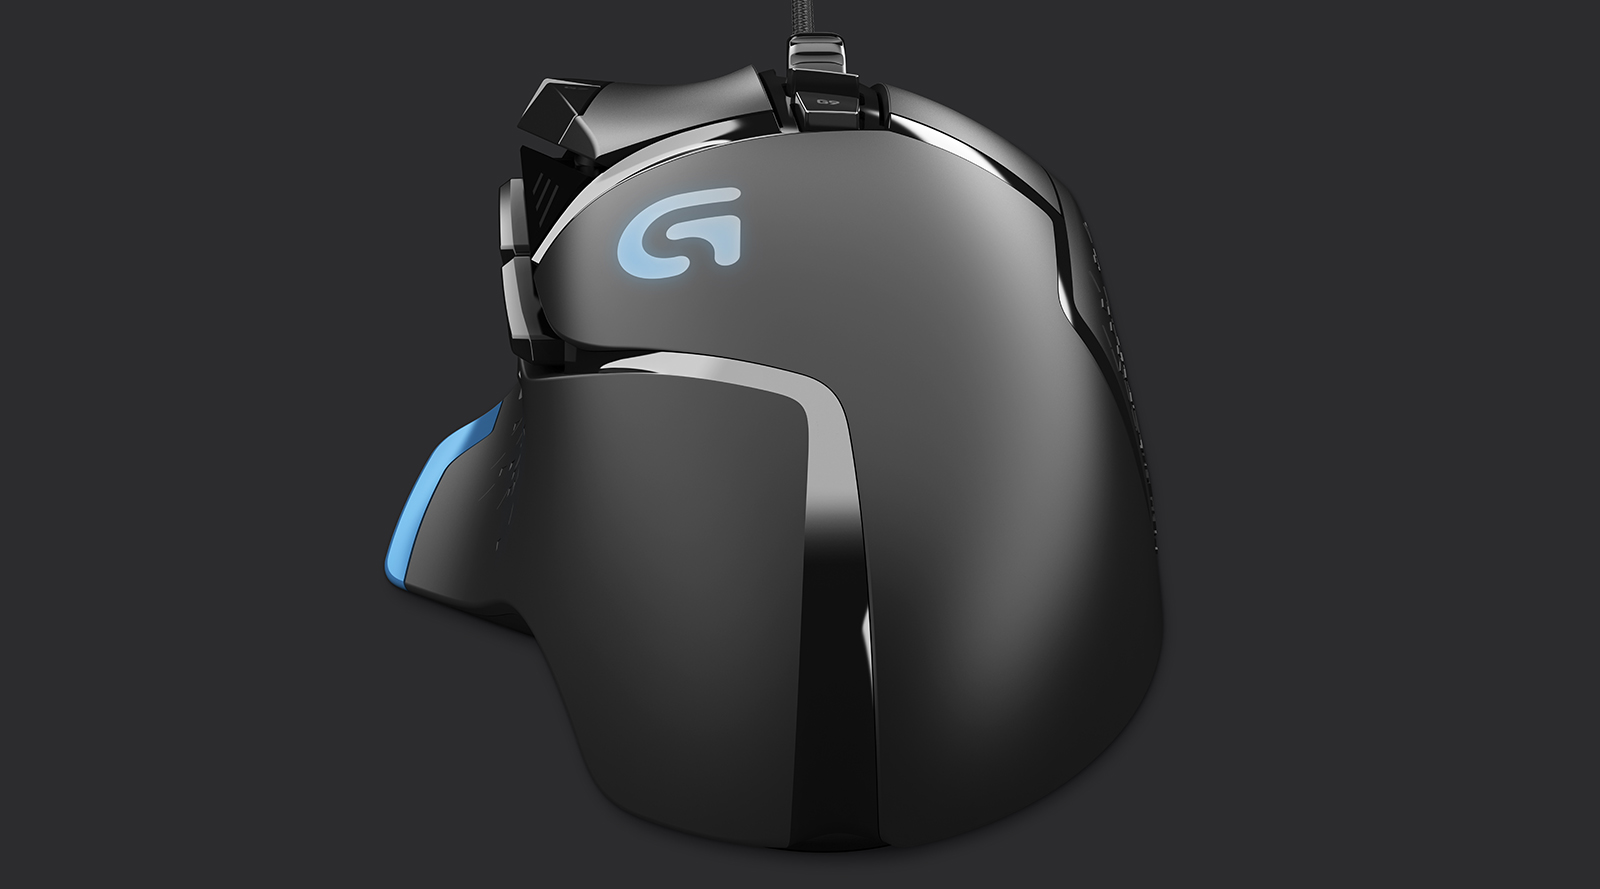 3D Product Modeling-Logitech Proteus Gaming Mouse- Produced by Digital Imaging Group LLC